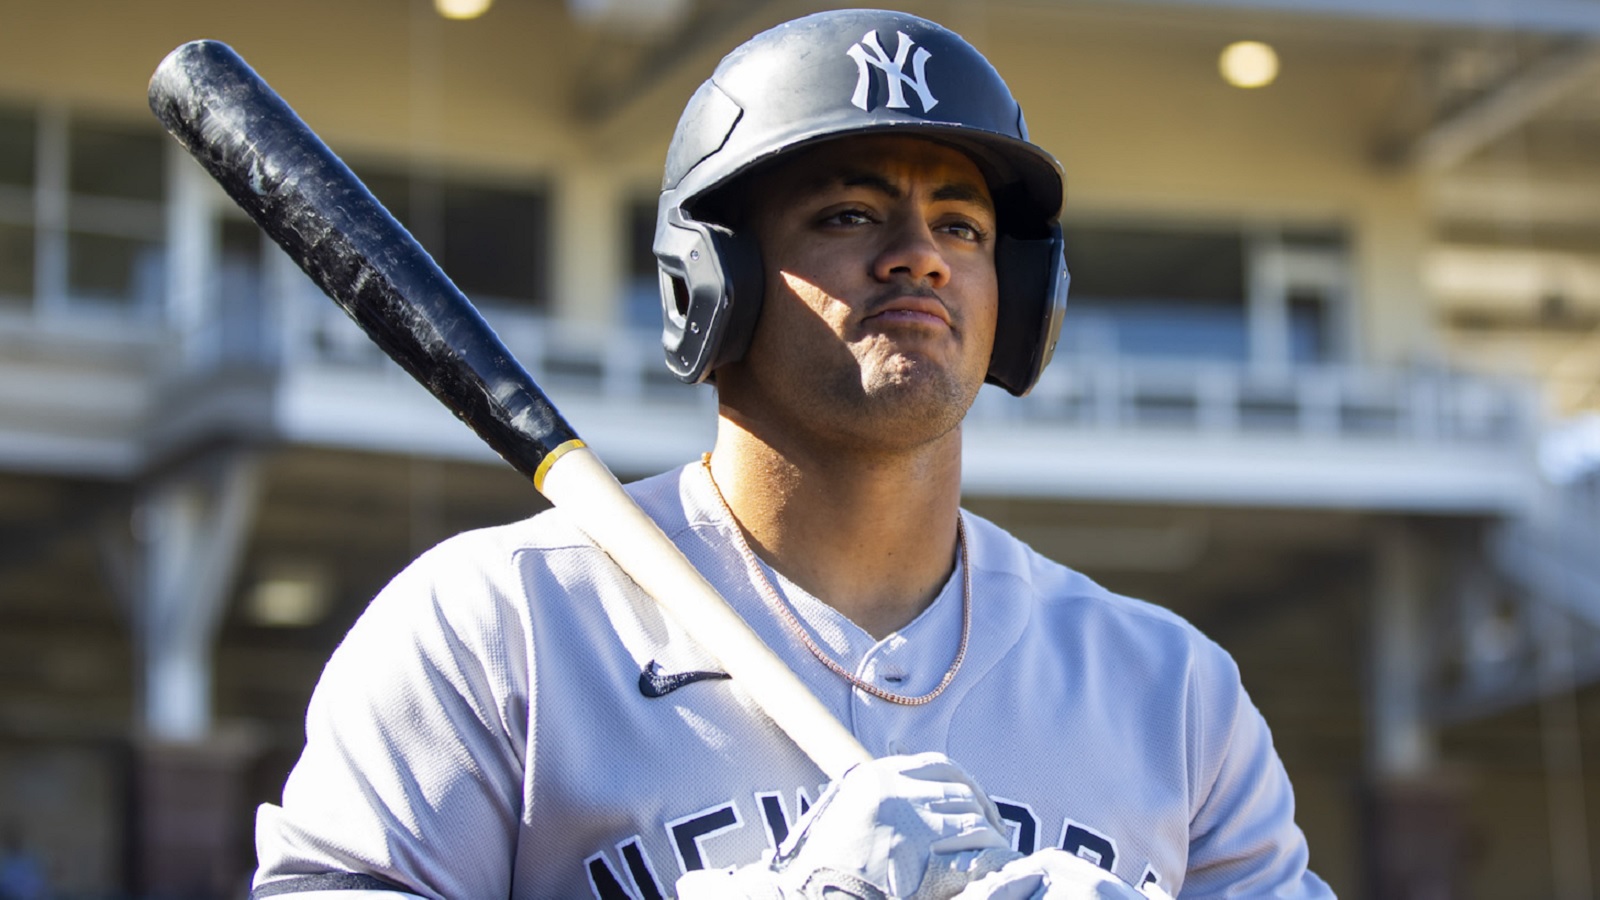 Jasson Dominguez injury update: Yankees star prospect out for year